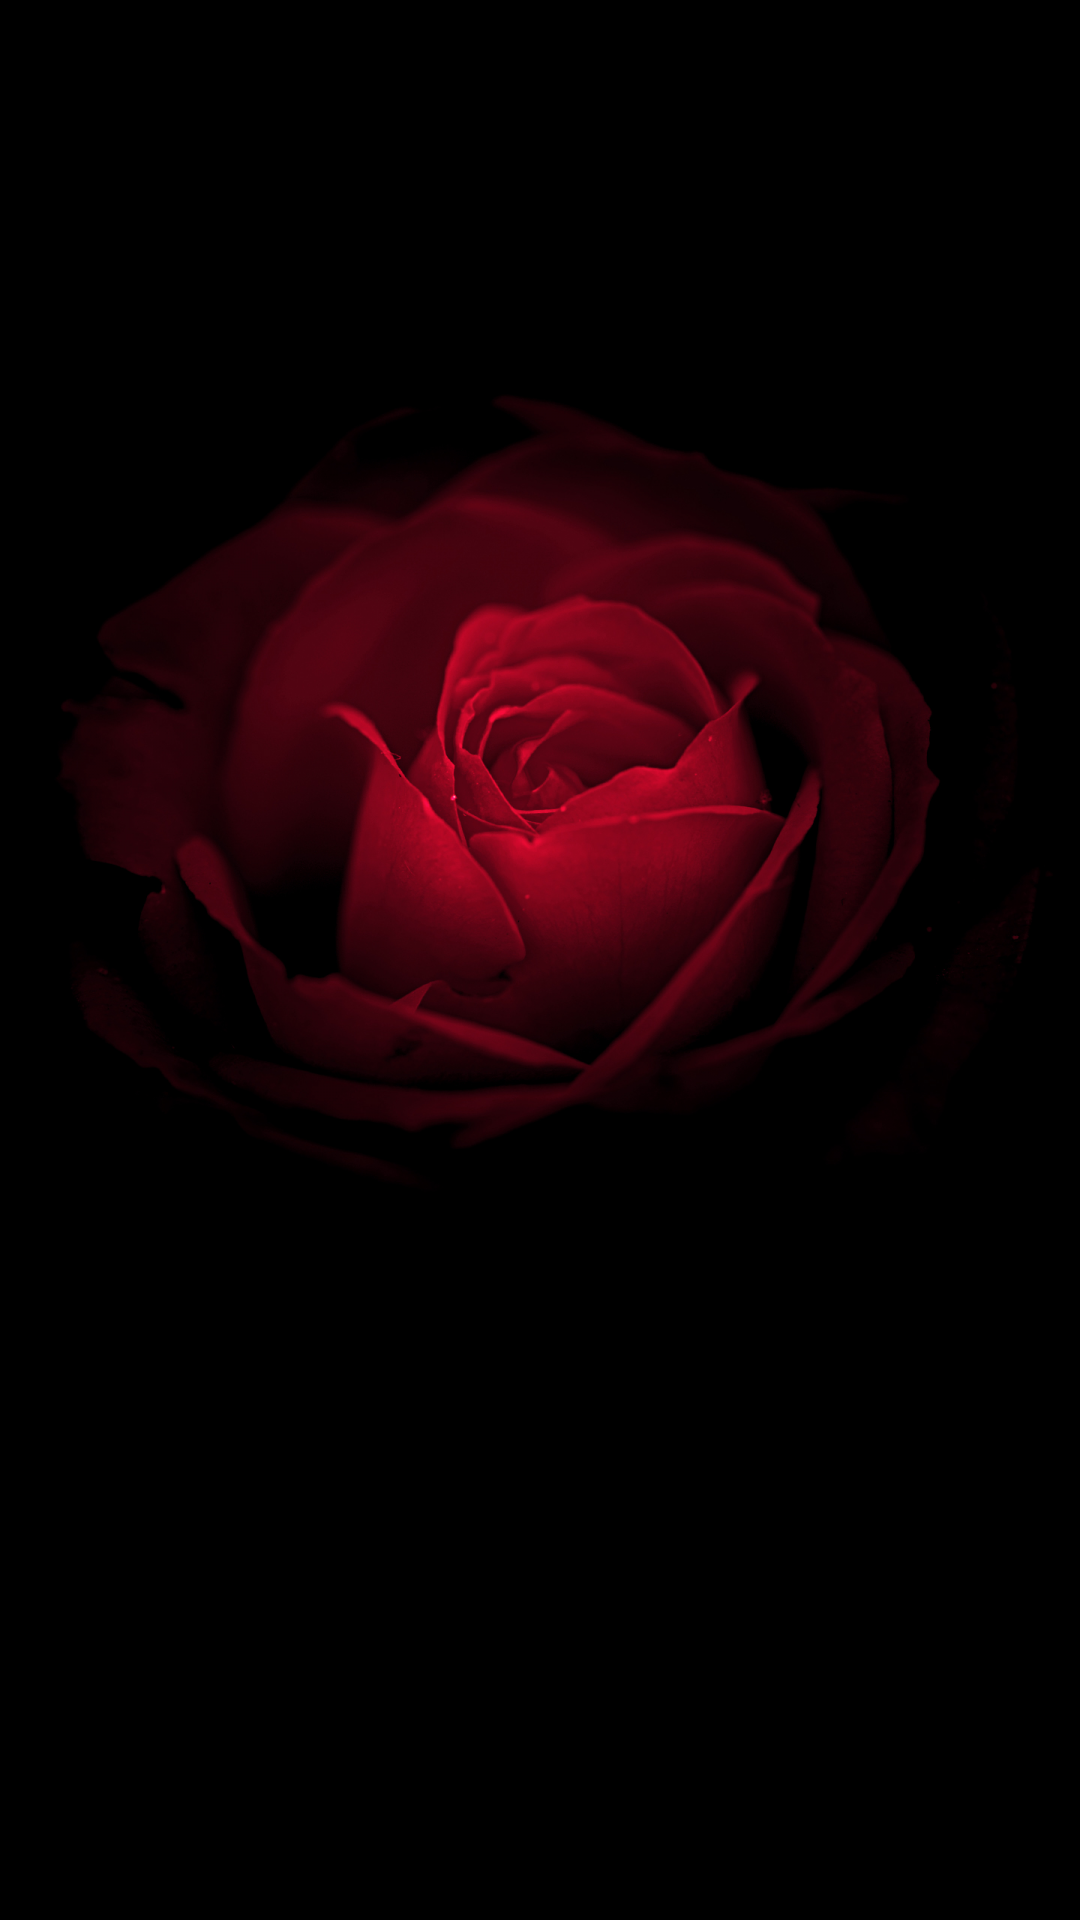 Wallpaper Rose flower, Red Rose, Huawei Mate RS, Porsche Design, Black, Stock, HD, Flowers,. Wallpaper for iPhone, Android, Mobile and Desktop